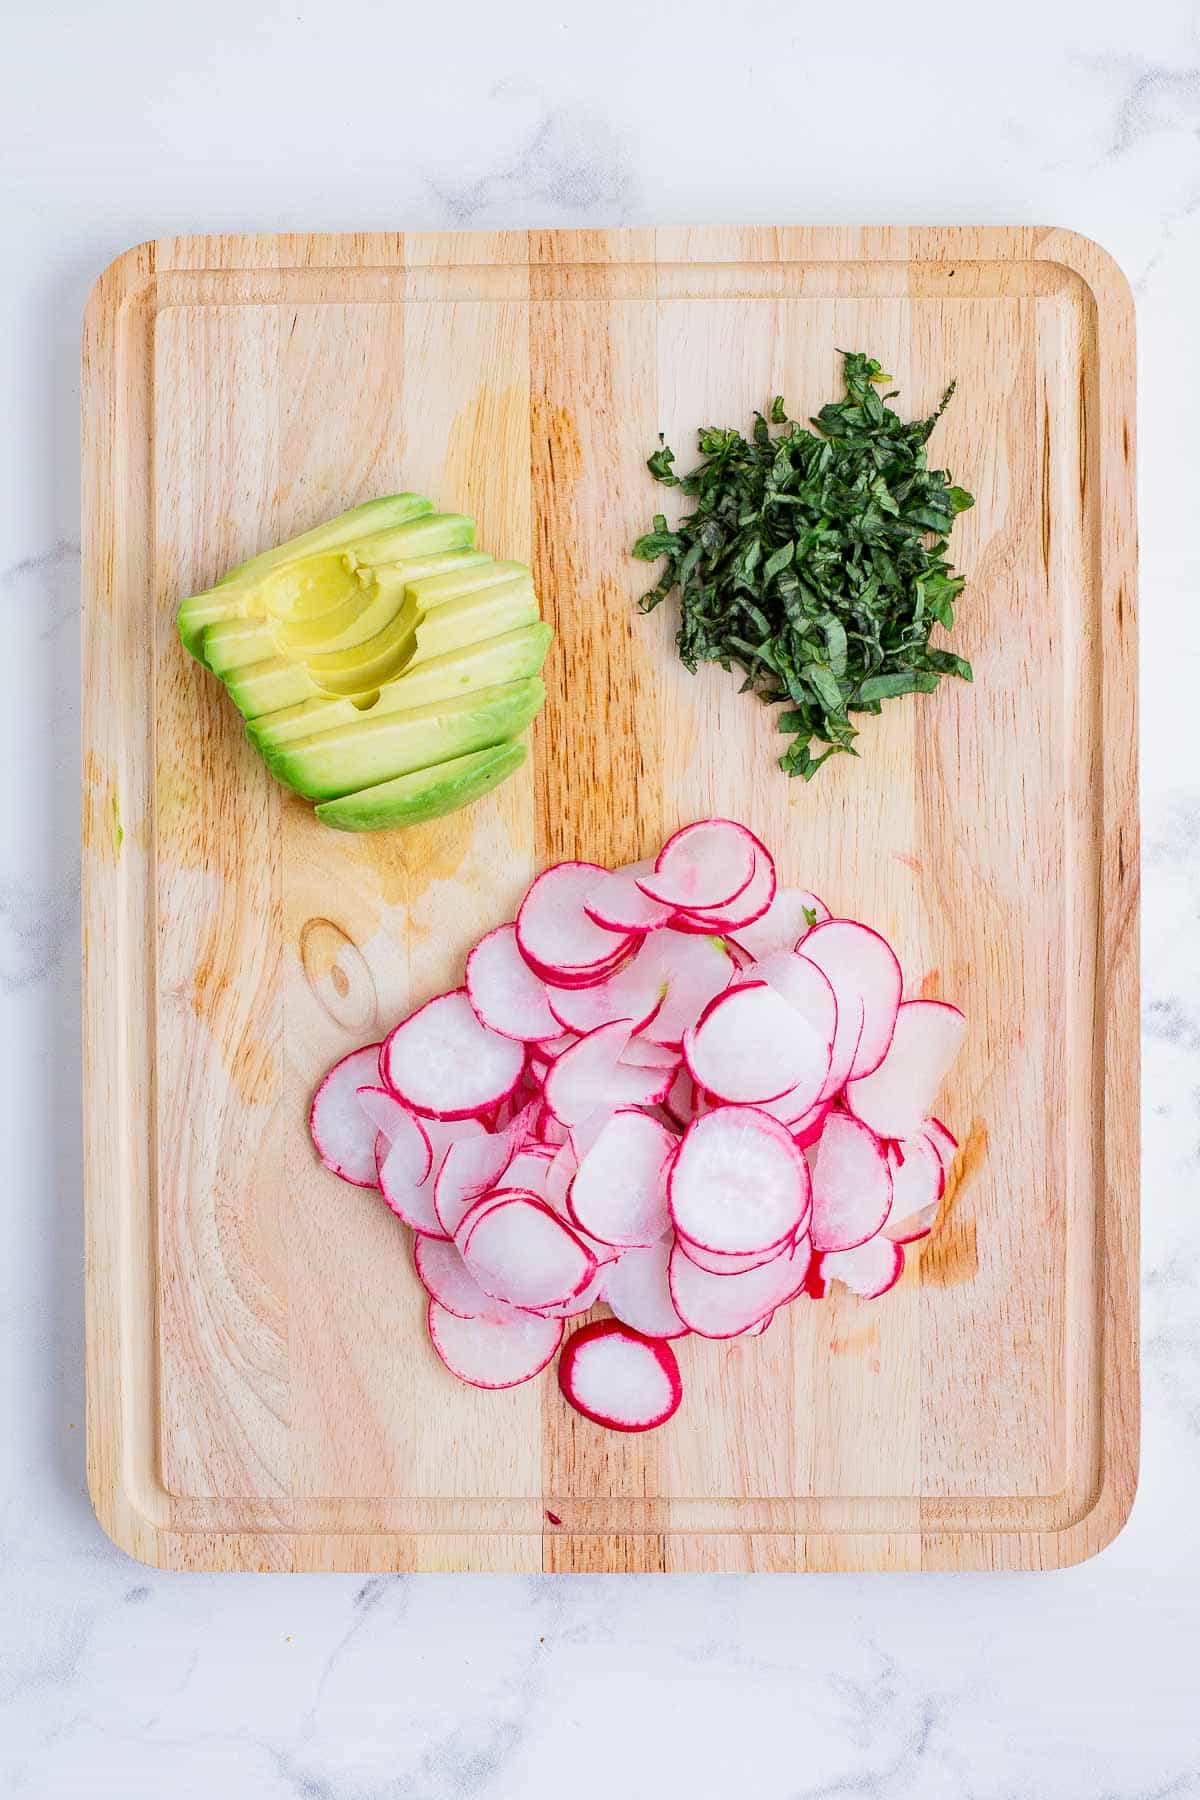 Radishes, avocado, and basil are cut for the salad.